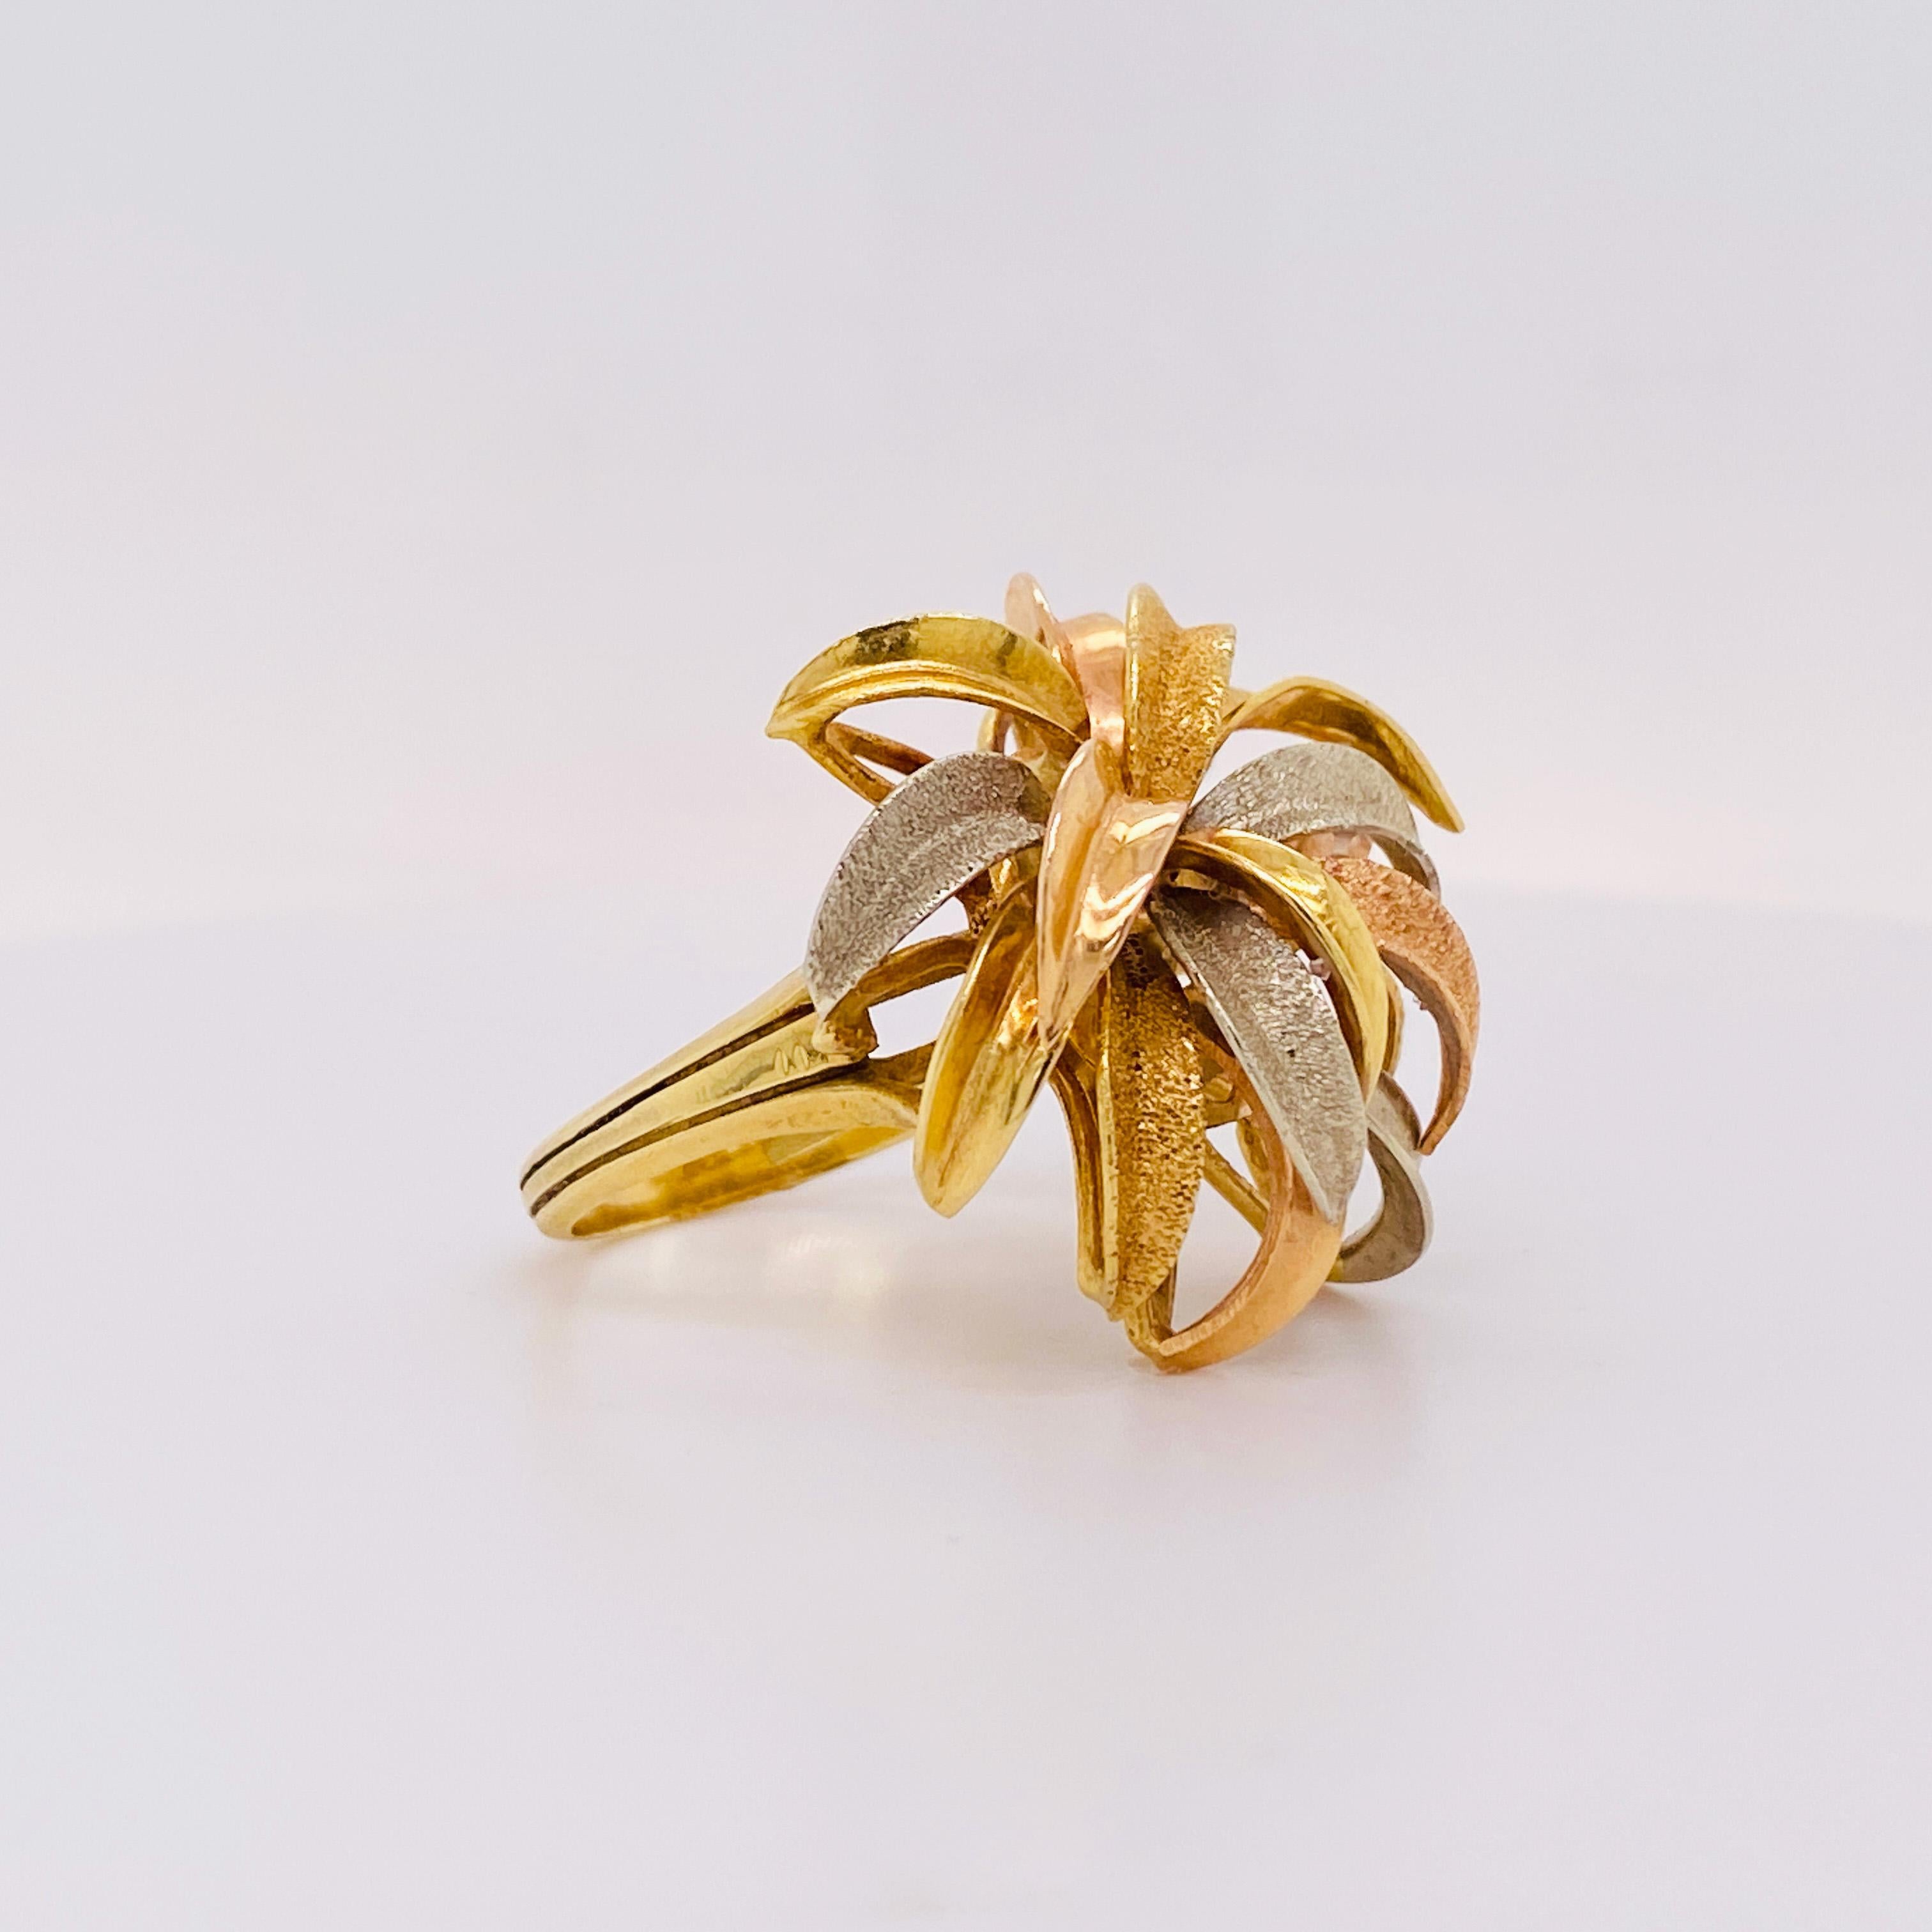 This ring design sparks of a multicolor fireworks display, or the gracefully arching crown of leaves of a Dracaena corn plant. This gorgeous tri-color 18 karat gold ring that looks perfect with any skin tone! This ring has a unique design that will